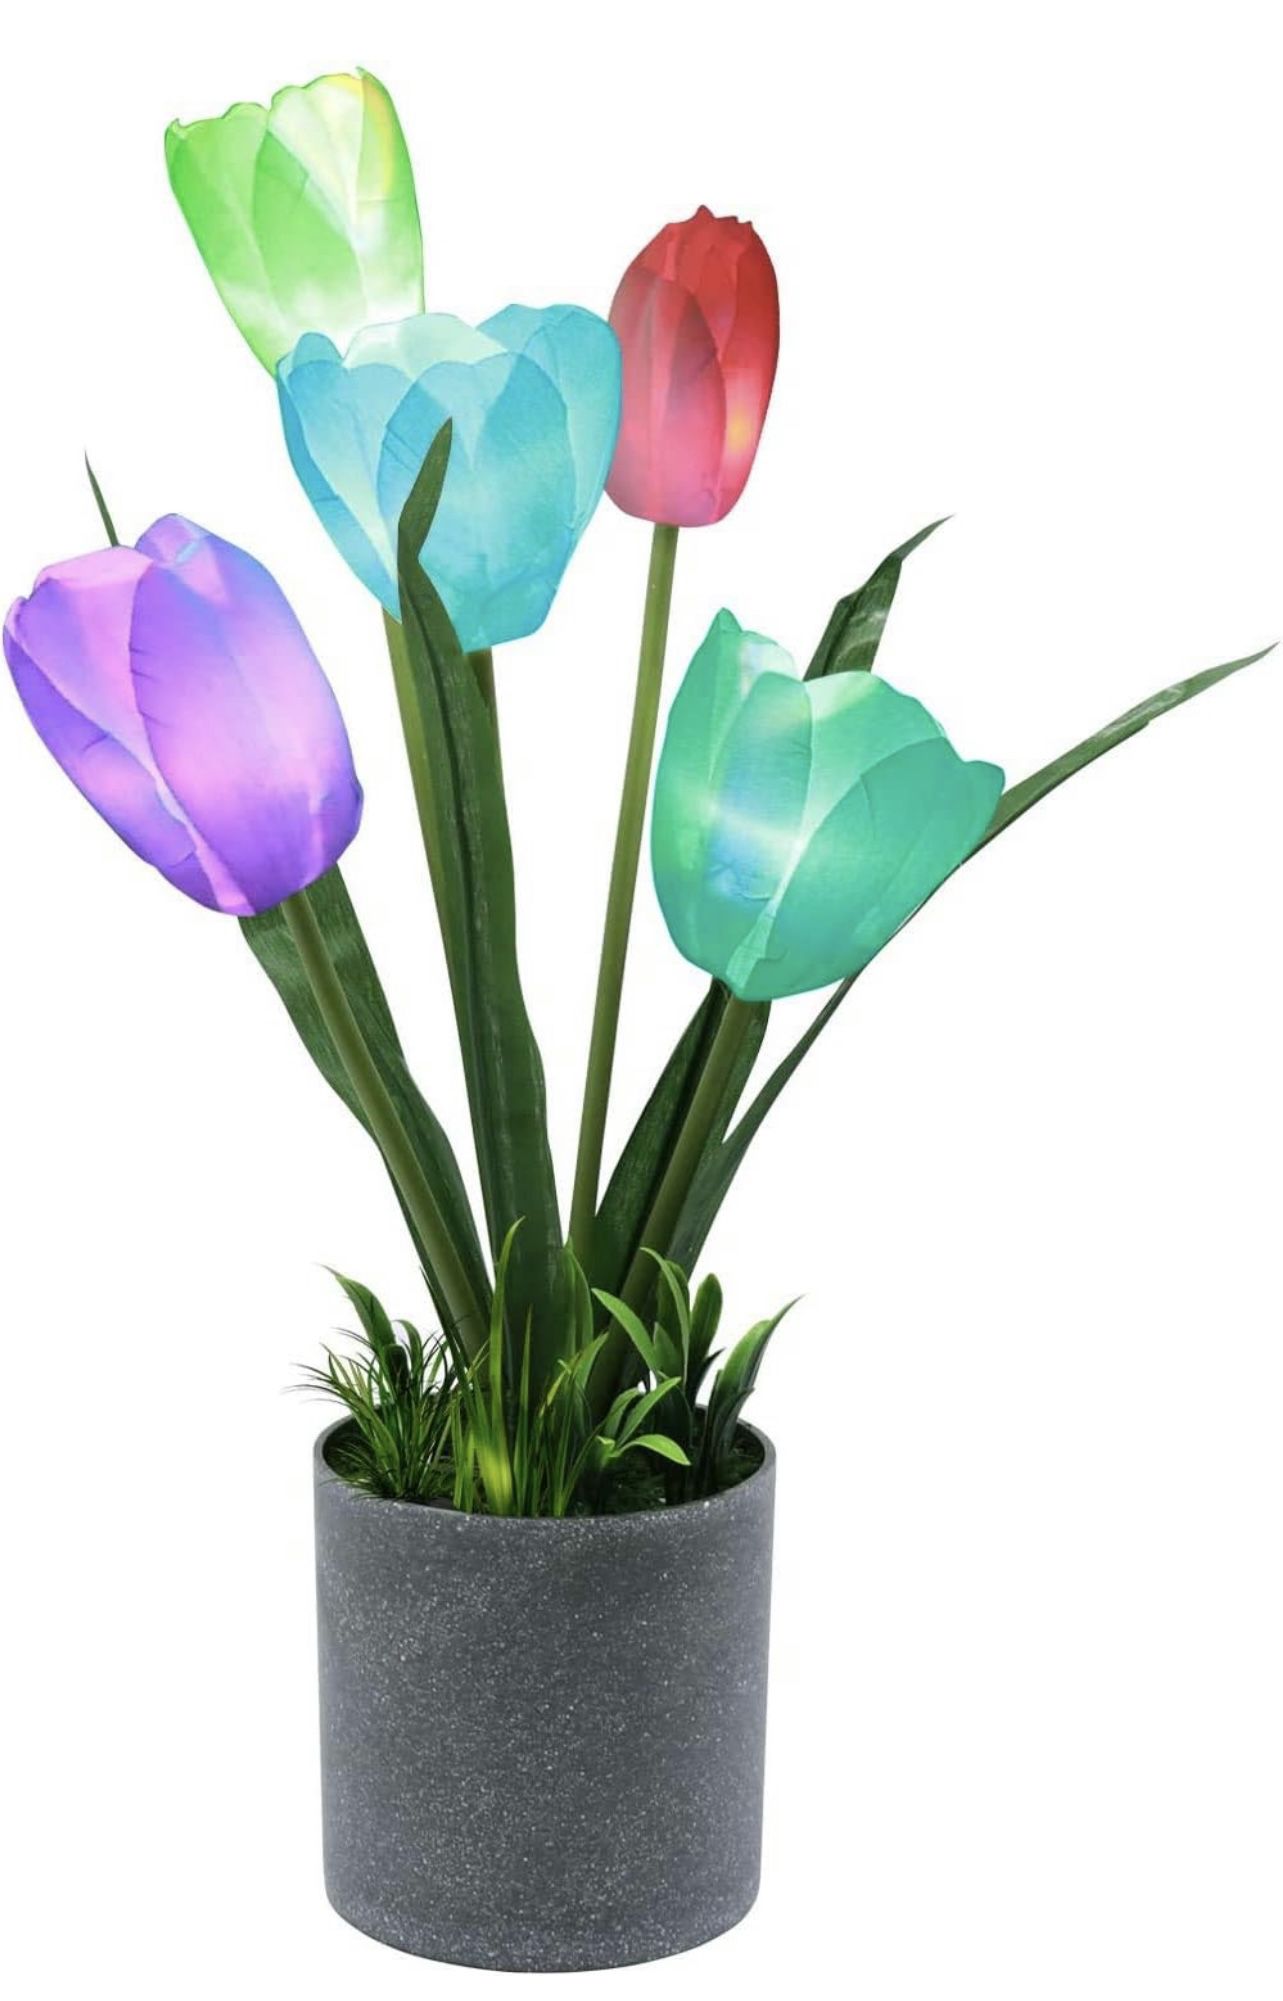 Artificial Potted Flowers with LED Light Fake Flower Plants Centerpiece for Table Tulip Home Decor